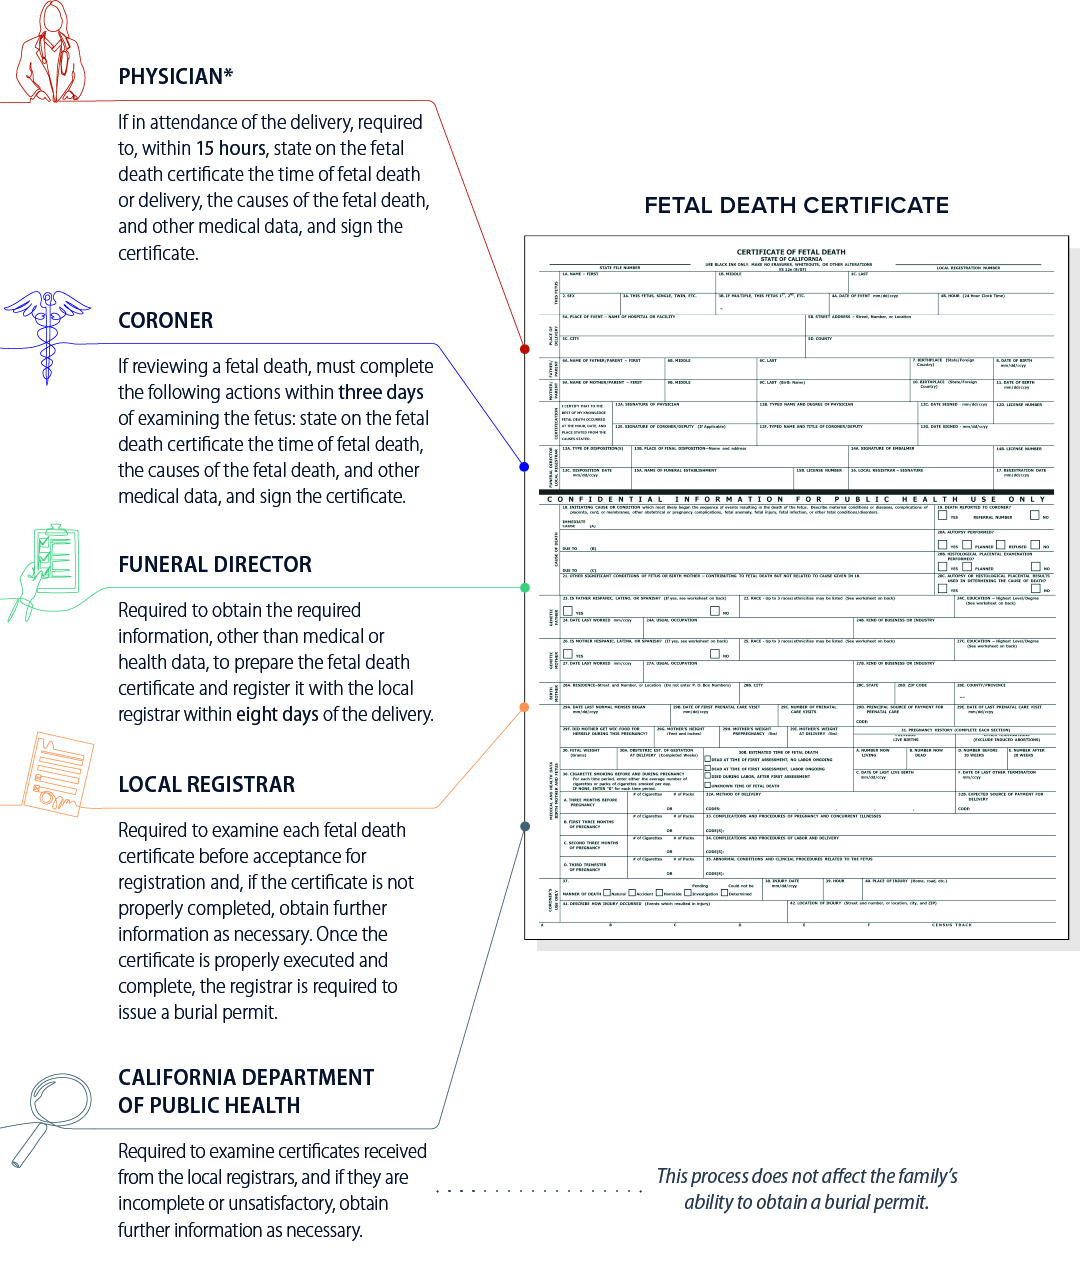 A figure displaying the various parties involved in the fetal death registration process, and their responsibilities as established by state law.